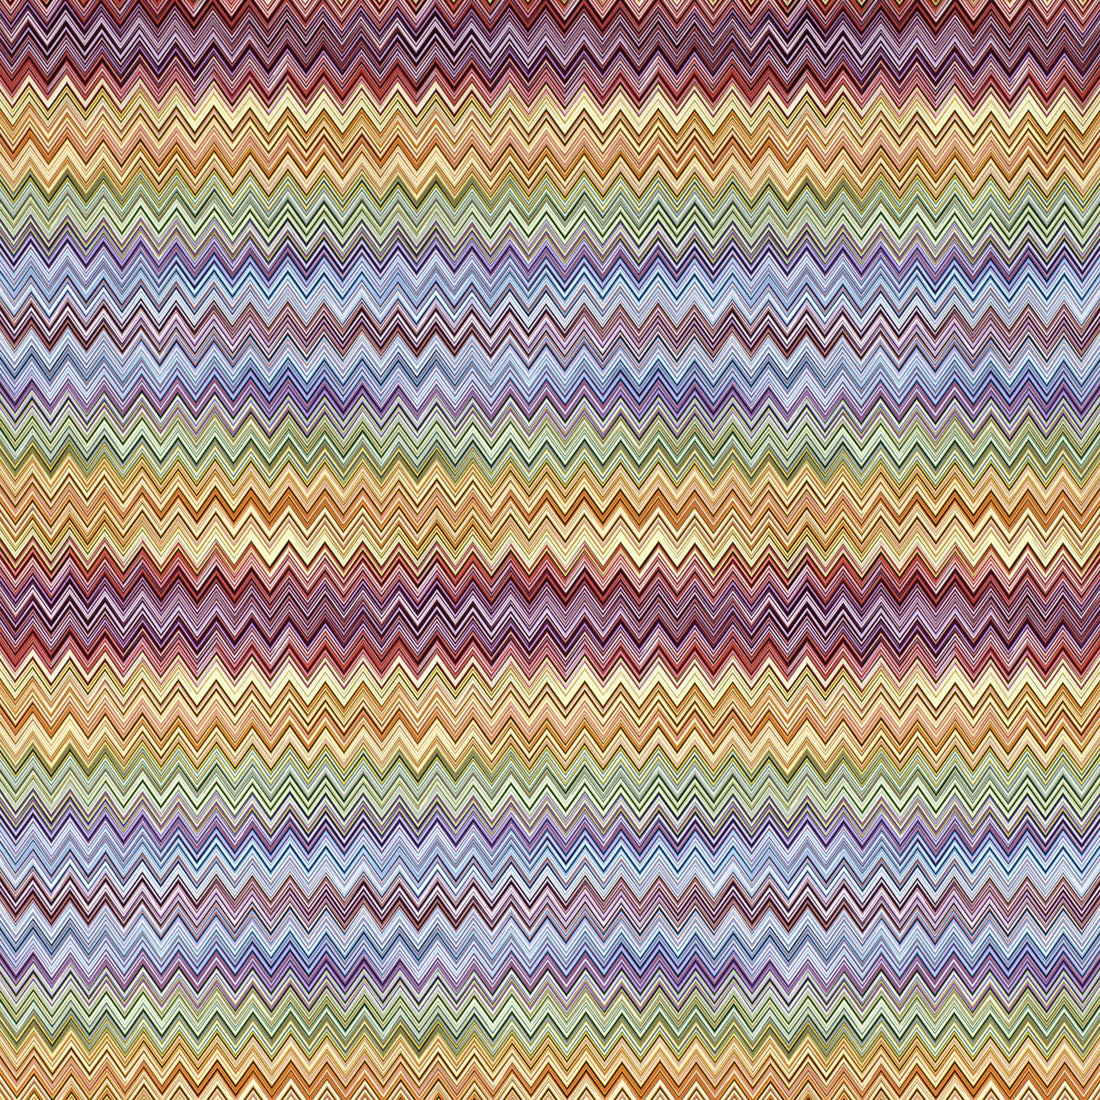 Jarris fabric in 156 color - pattern 36162.540.0 - by Kravet Couture in the Missoni Home collection